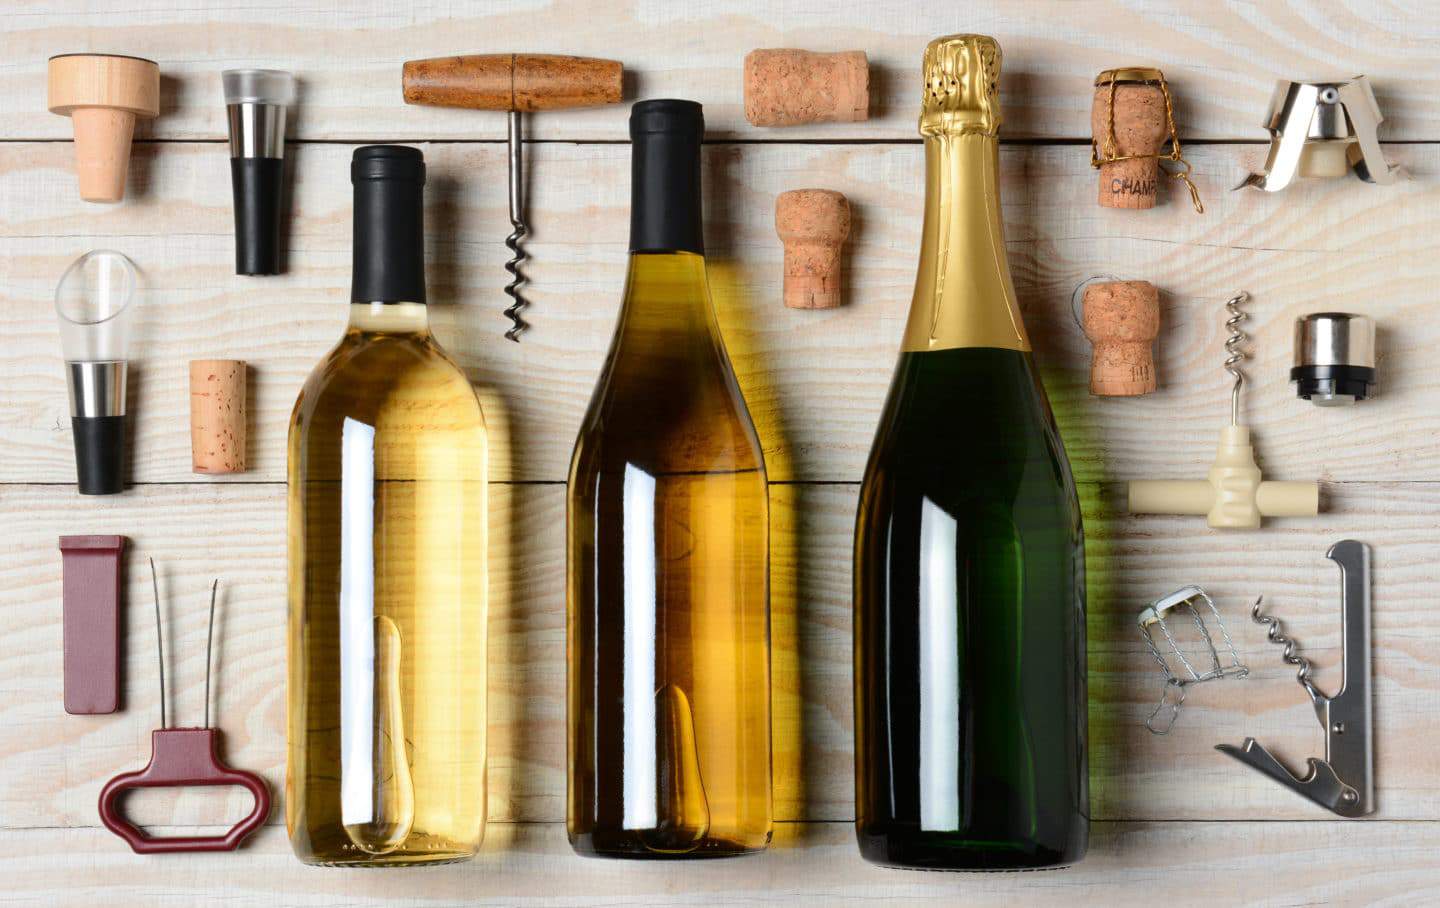 The 9 Best Colorado Gifts for Wine Lovers - 5280